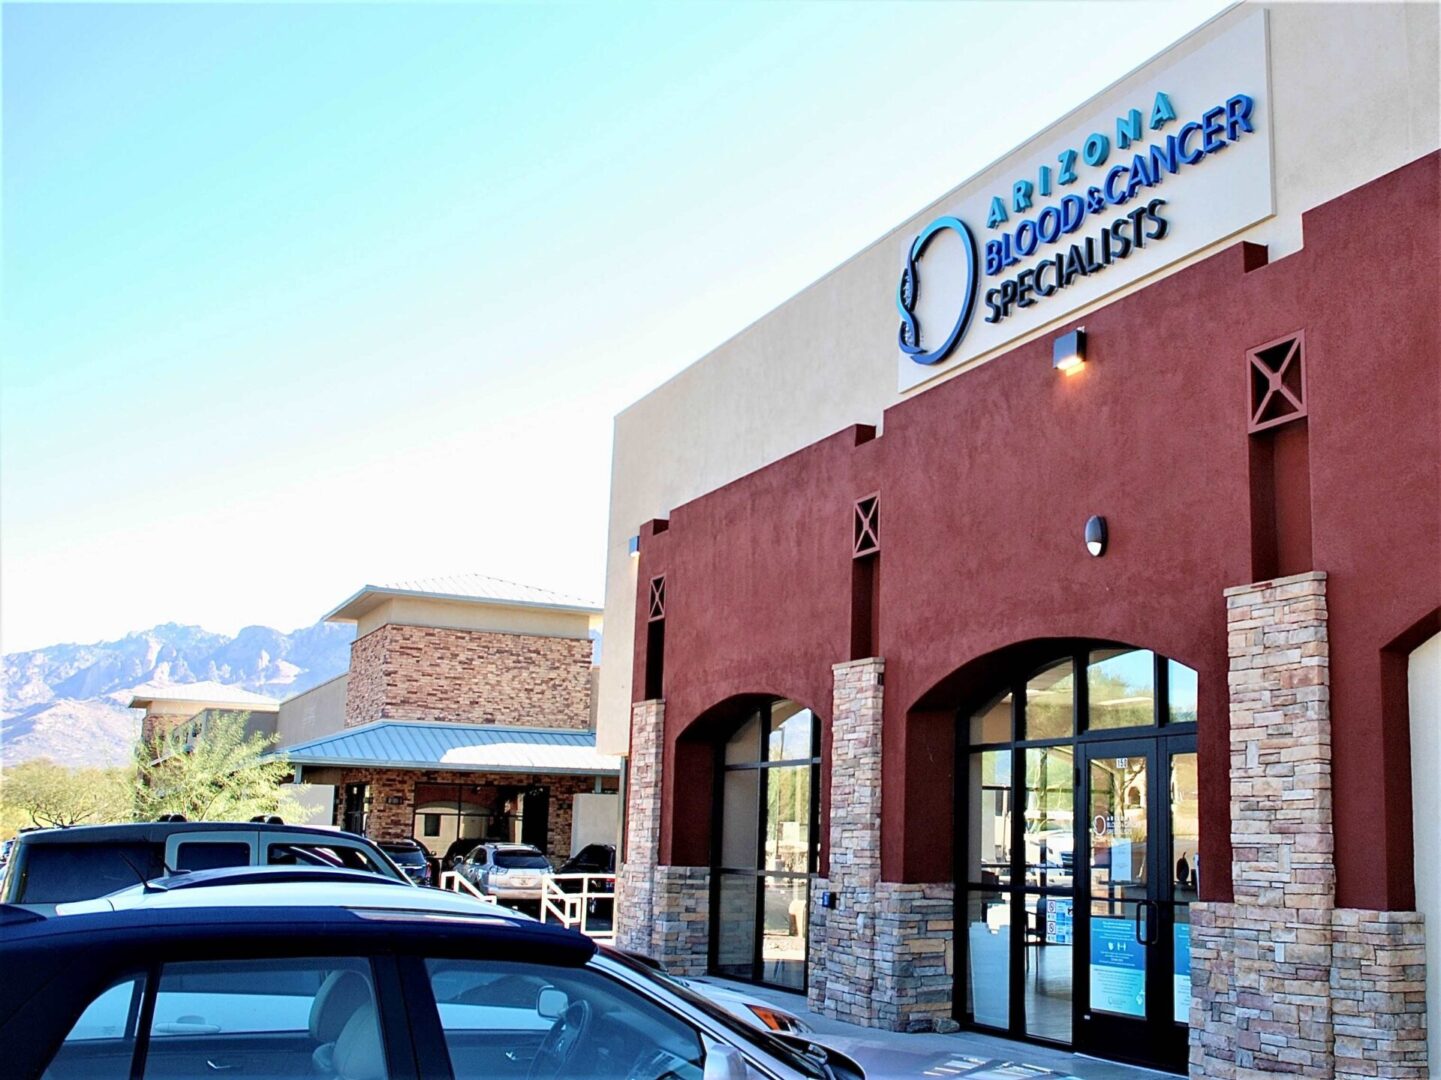 Outside view of Arizona blood and cancer specialist